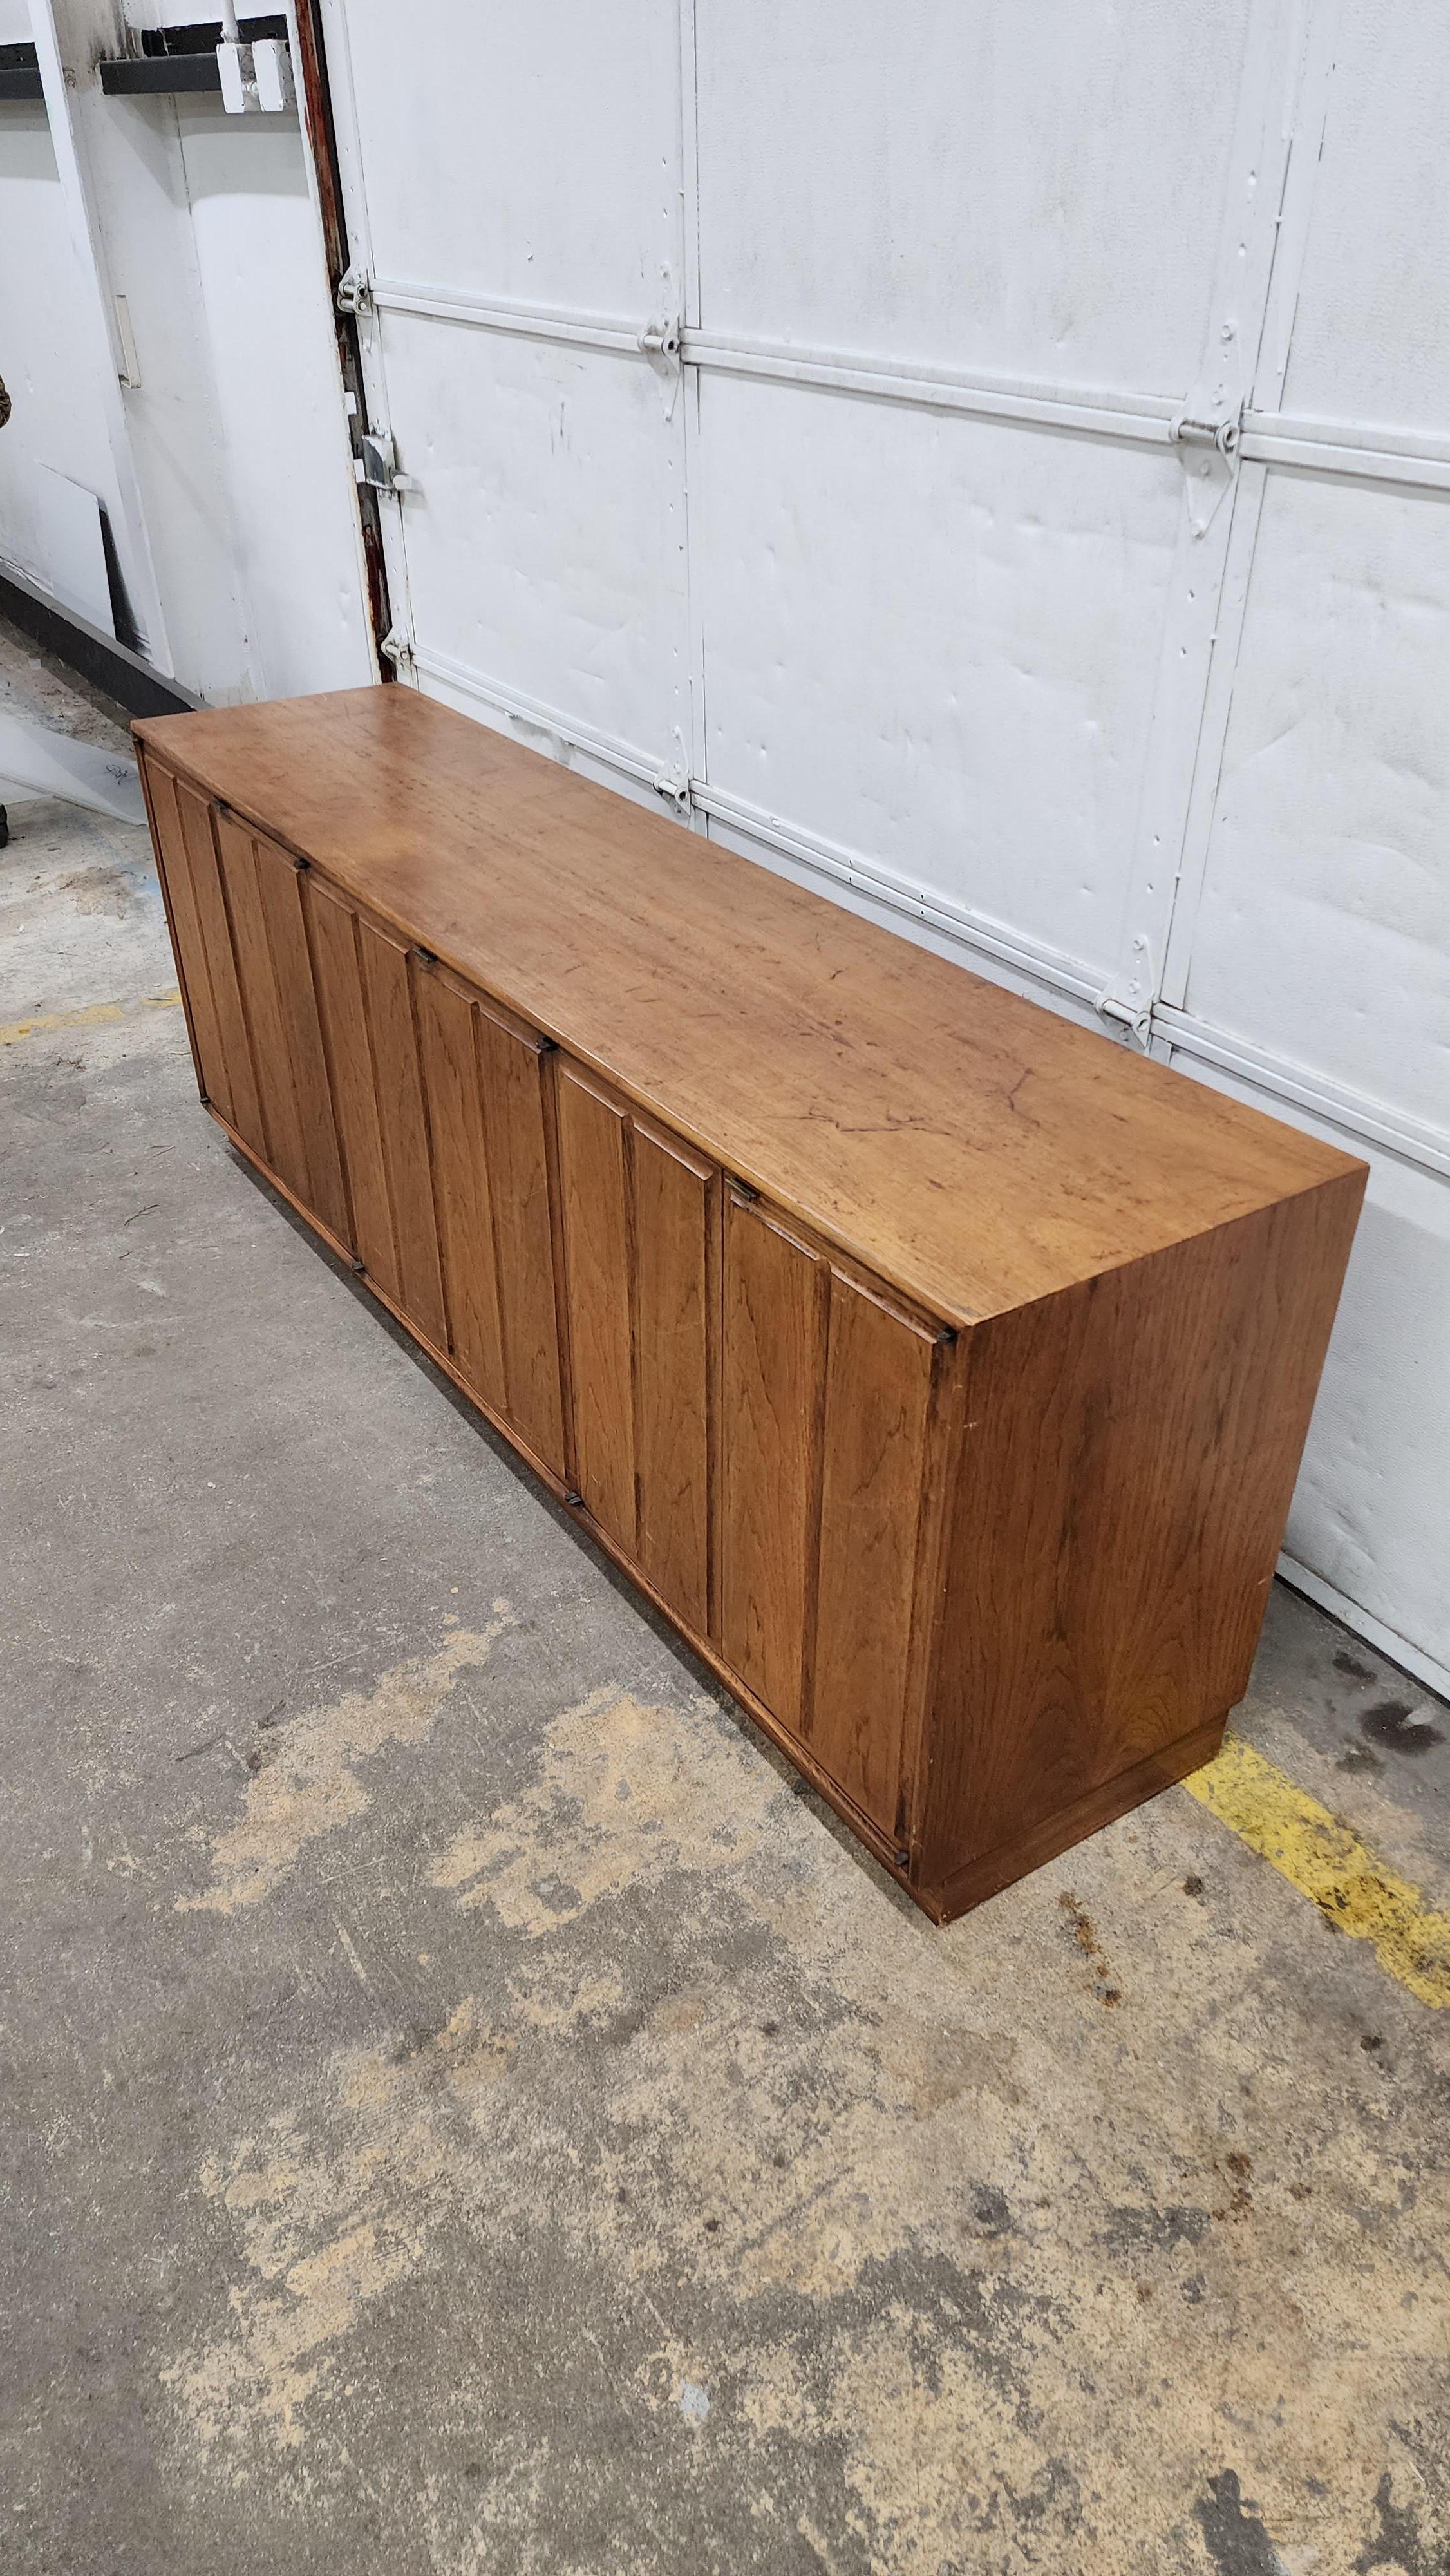 walnut credenza with speckled finish.  doors open to reveal 1 drawer in each section.  shelf can be added. holes in back for a/v equipment. 